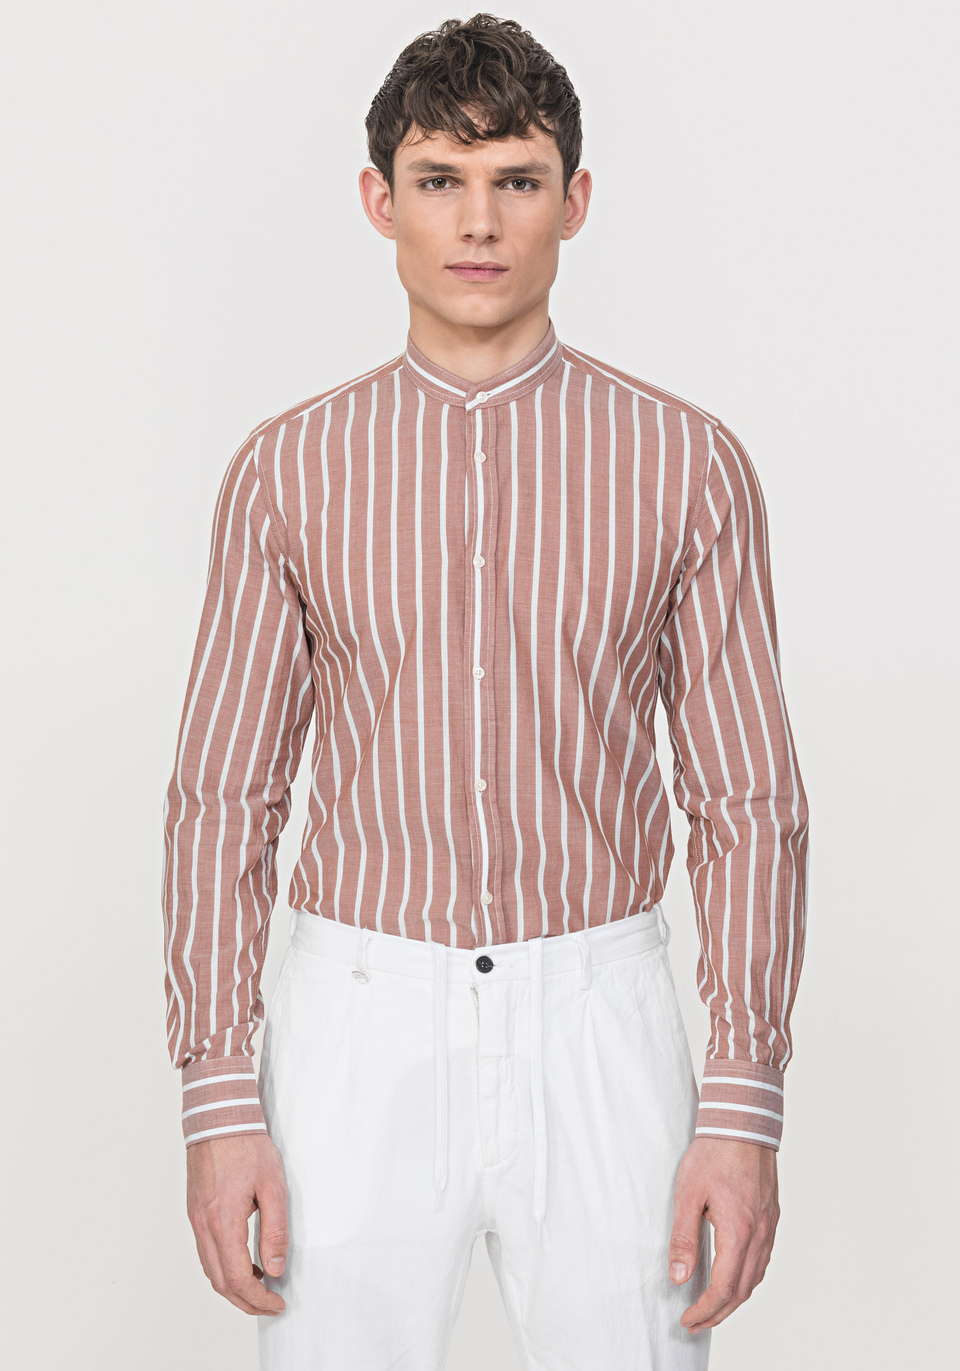 SLIM-FIT SHIRT IN LIGHTWEIGHT COTTON WITH A STRIPE PATTERN - Antony Morato Online Shop